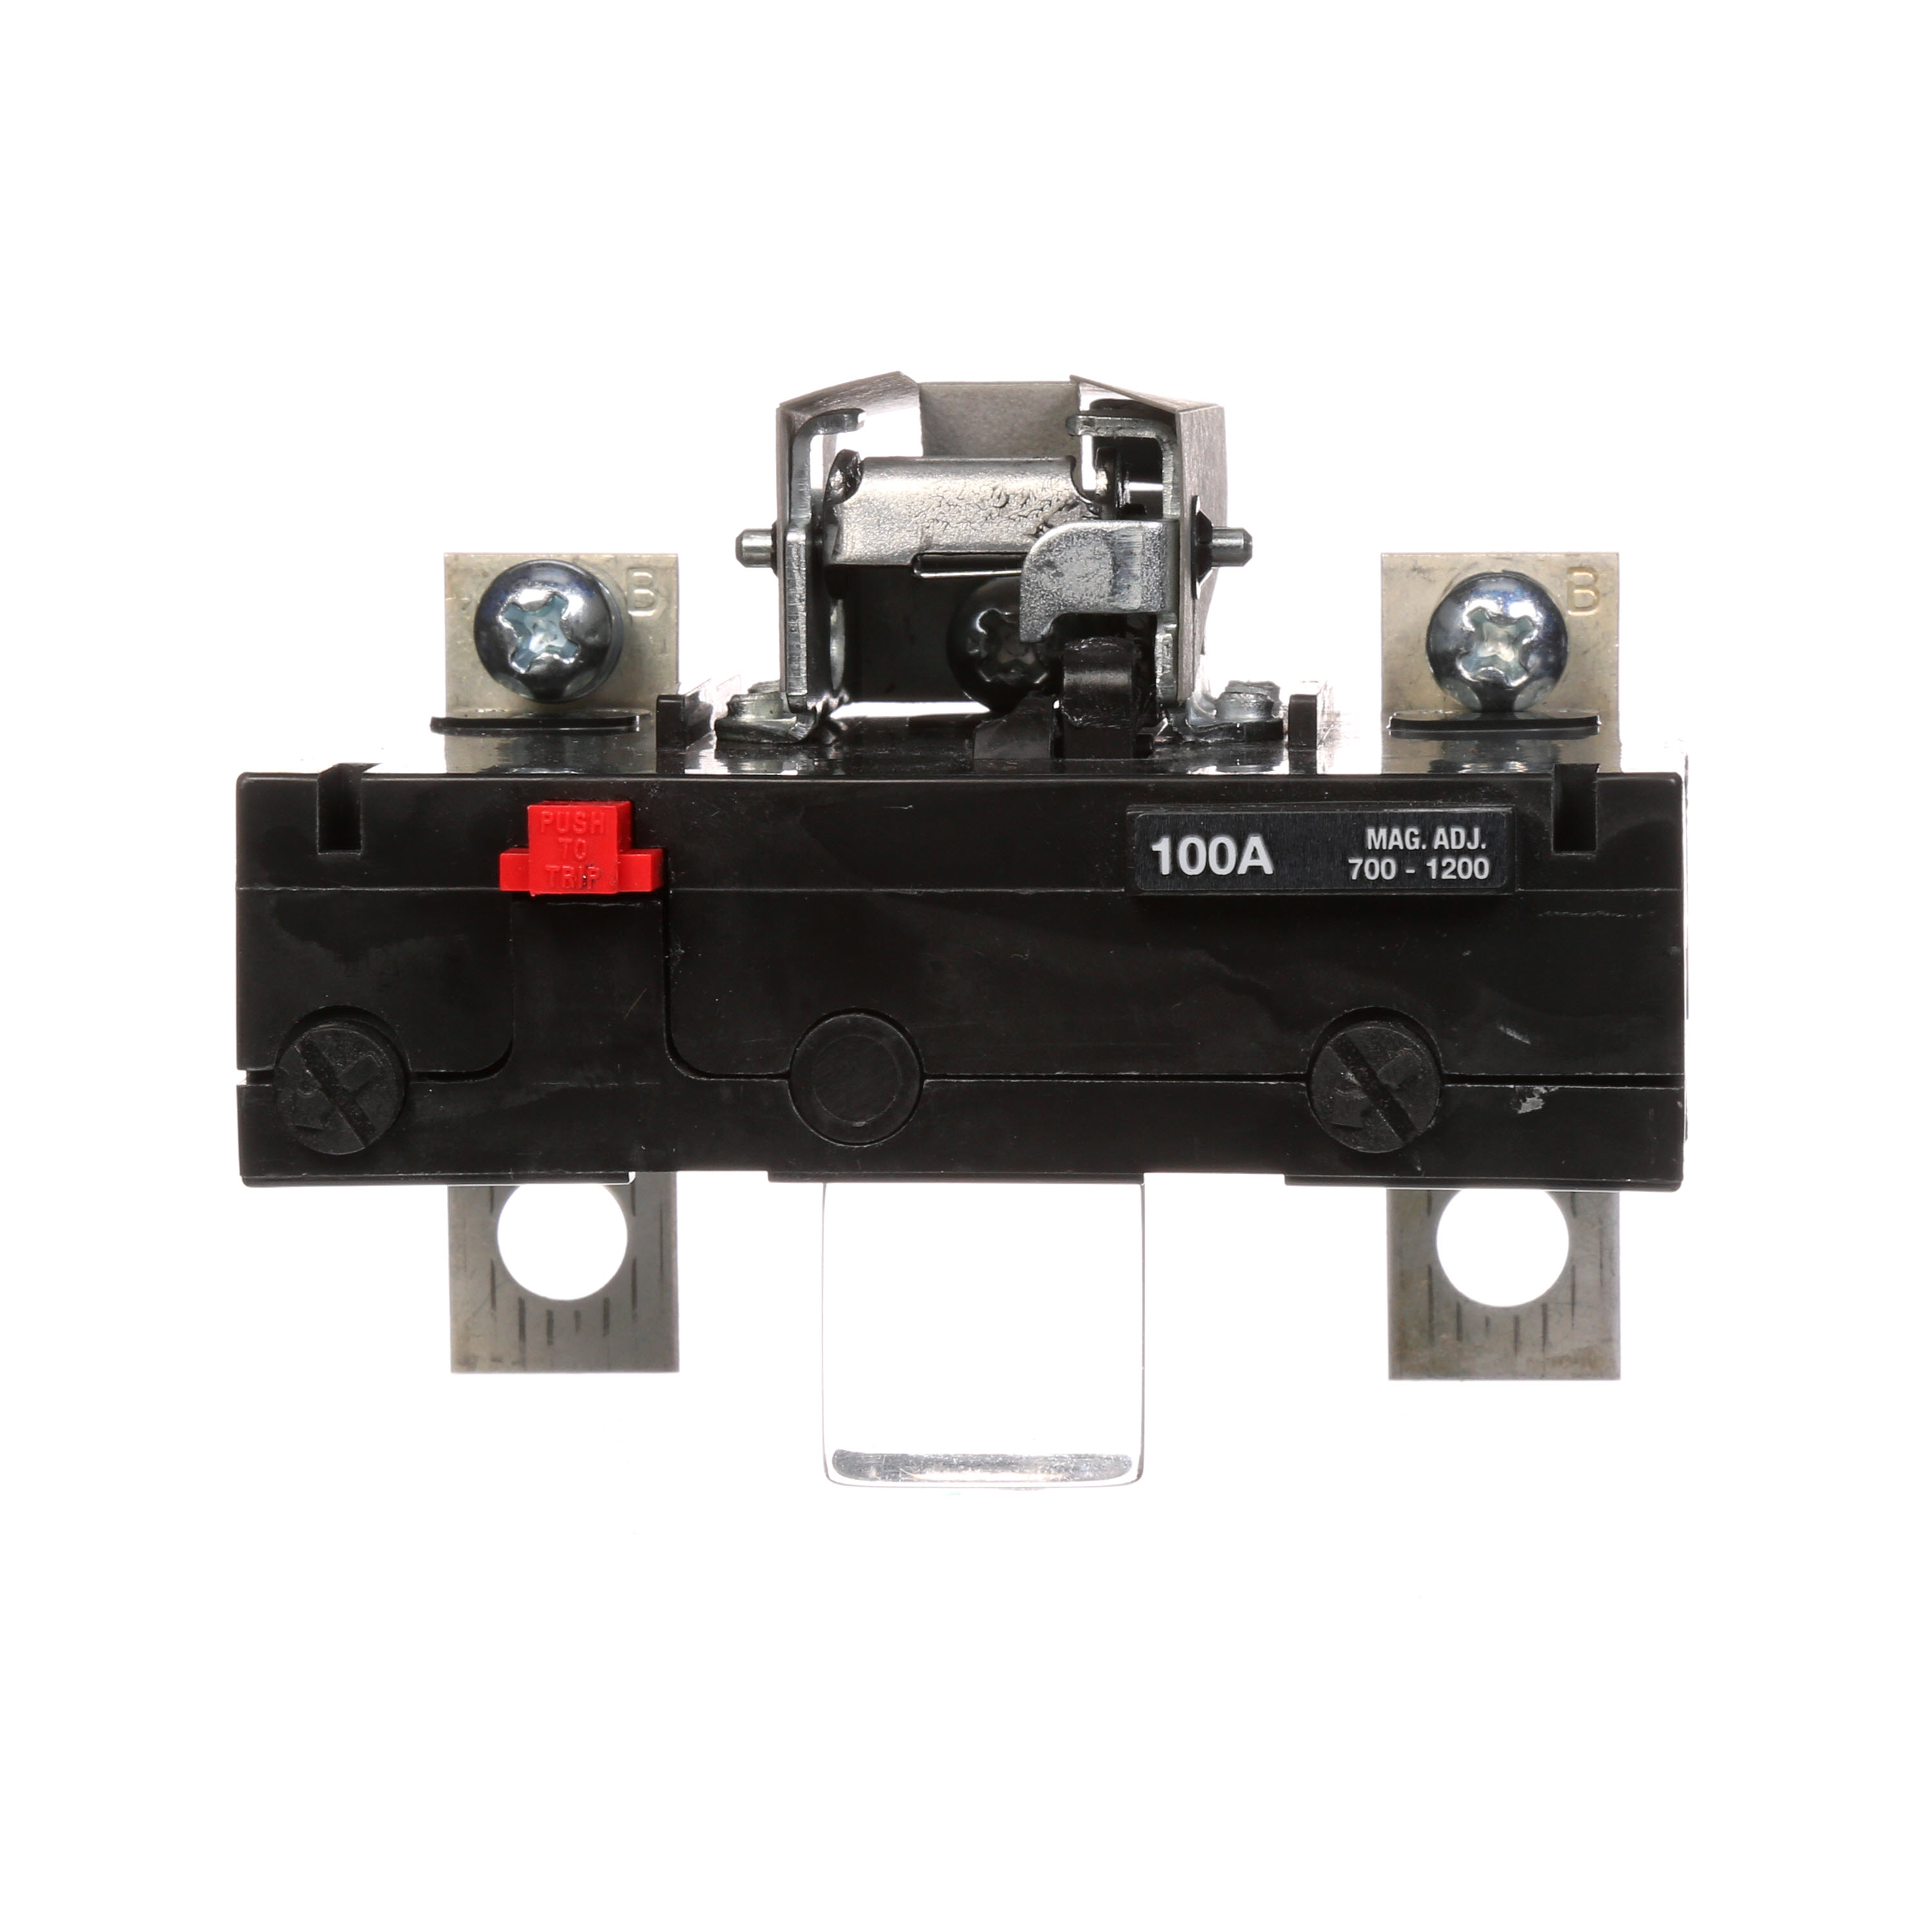 SIEMENS LOW VOLTAGE SENTRON MOLDED CASE CIRCUIT BREAKER. THERMAL - MAGNETIC TRIP UNIT FOR FD FRAME 100A 2-POLE 600V BREAKERS.